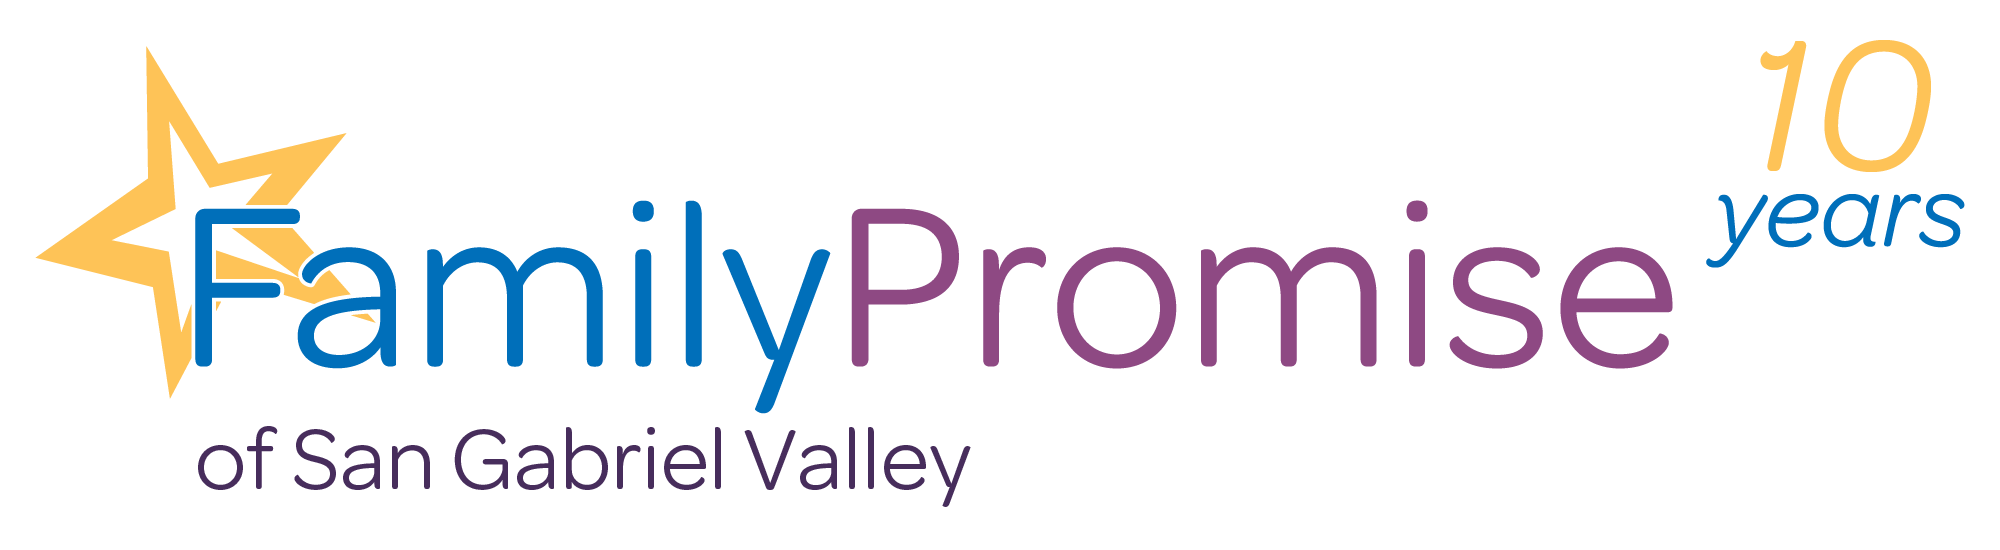 Family Promise of San Gabriel Valley